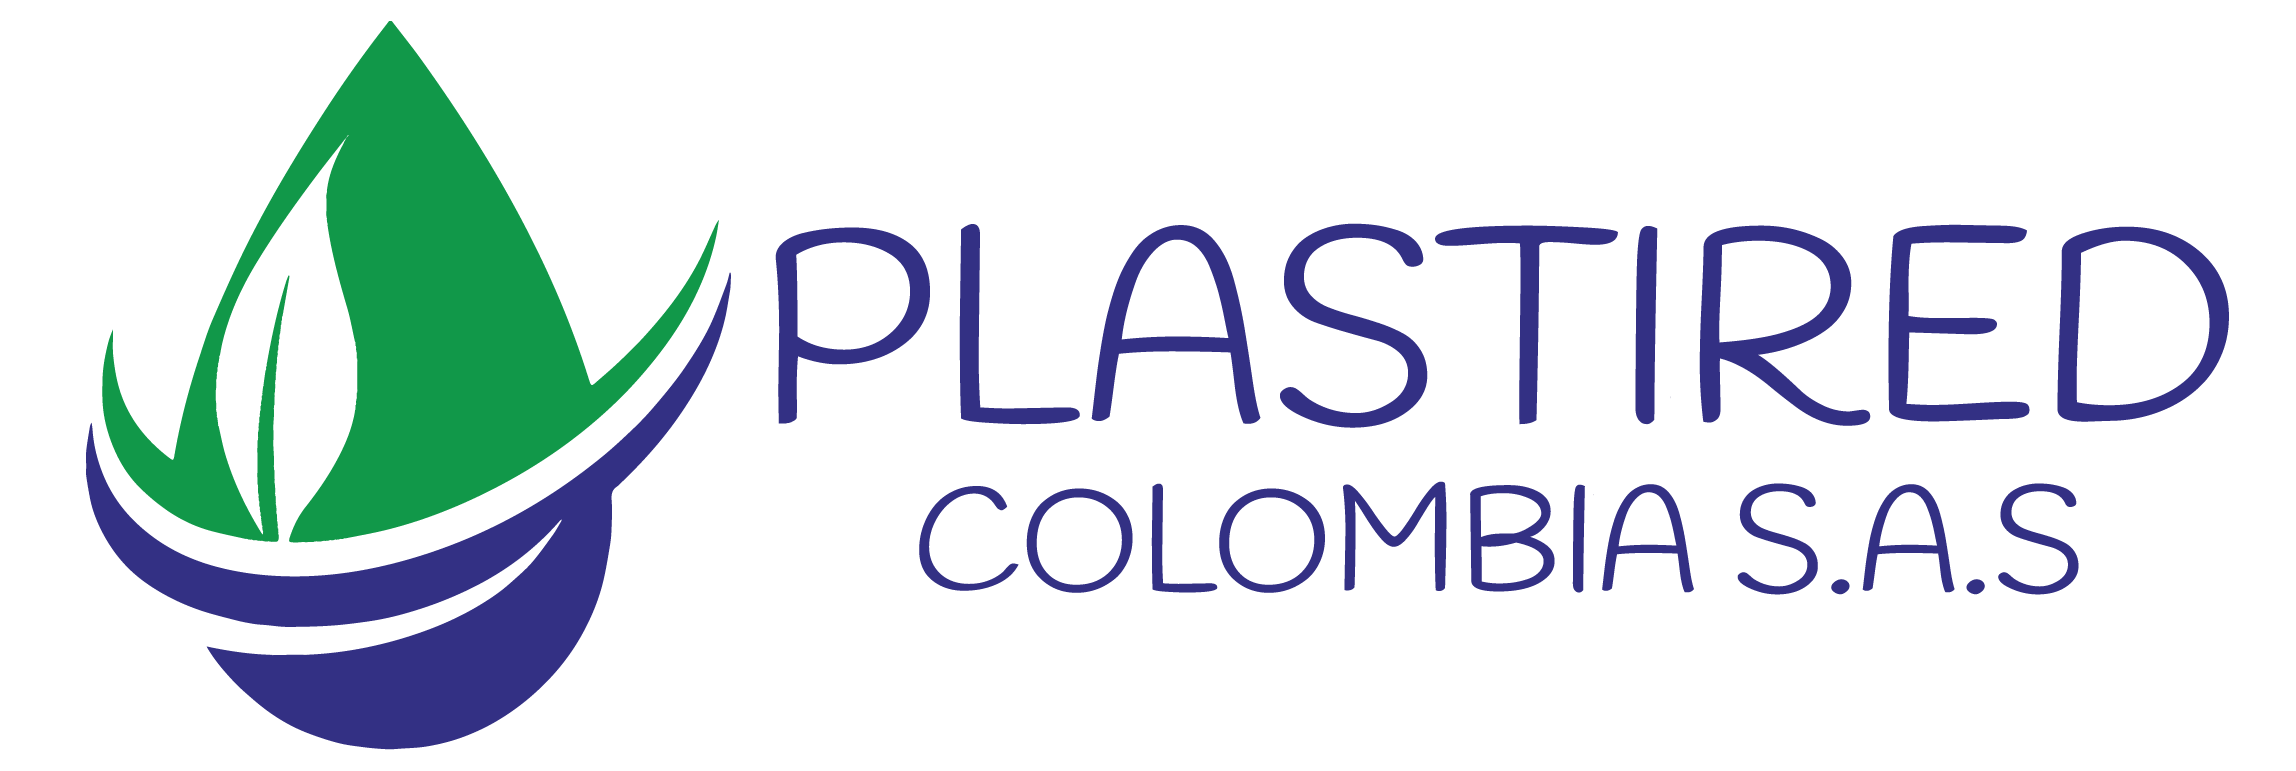 Plastired Colombia S.A.S 